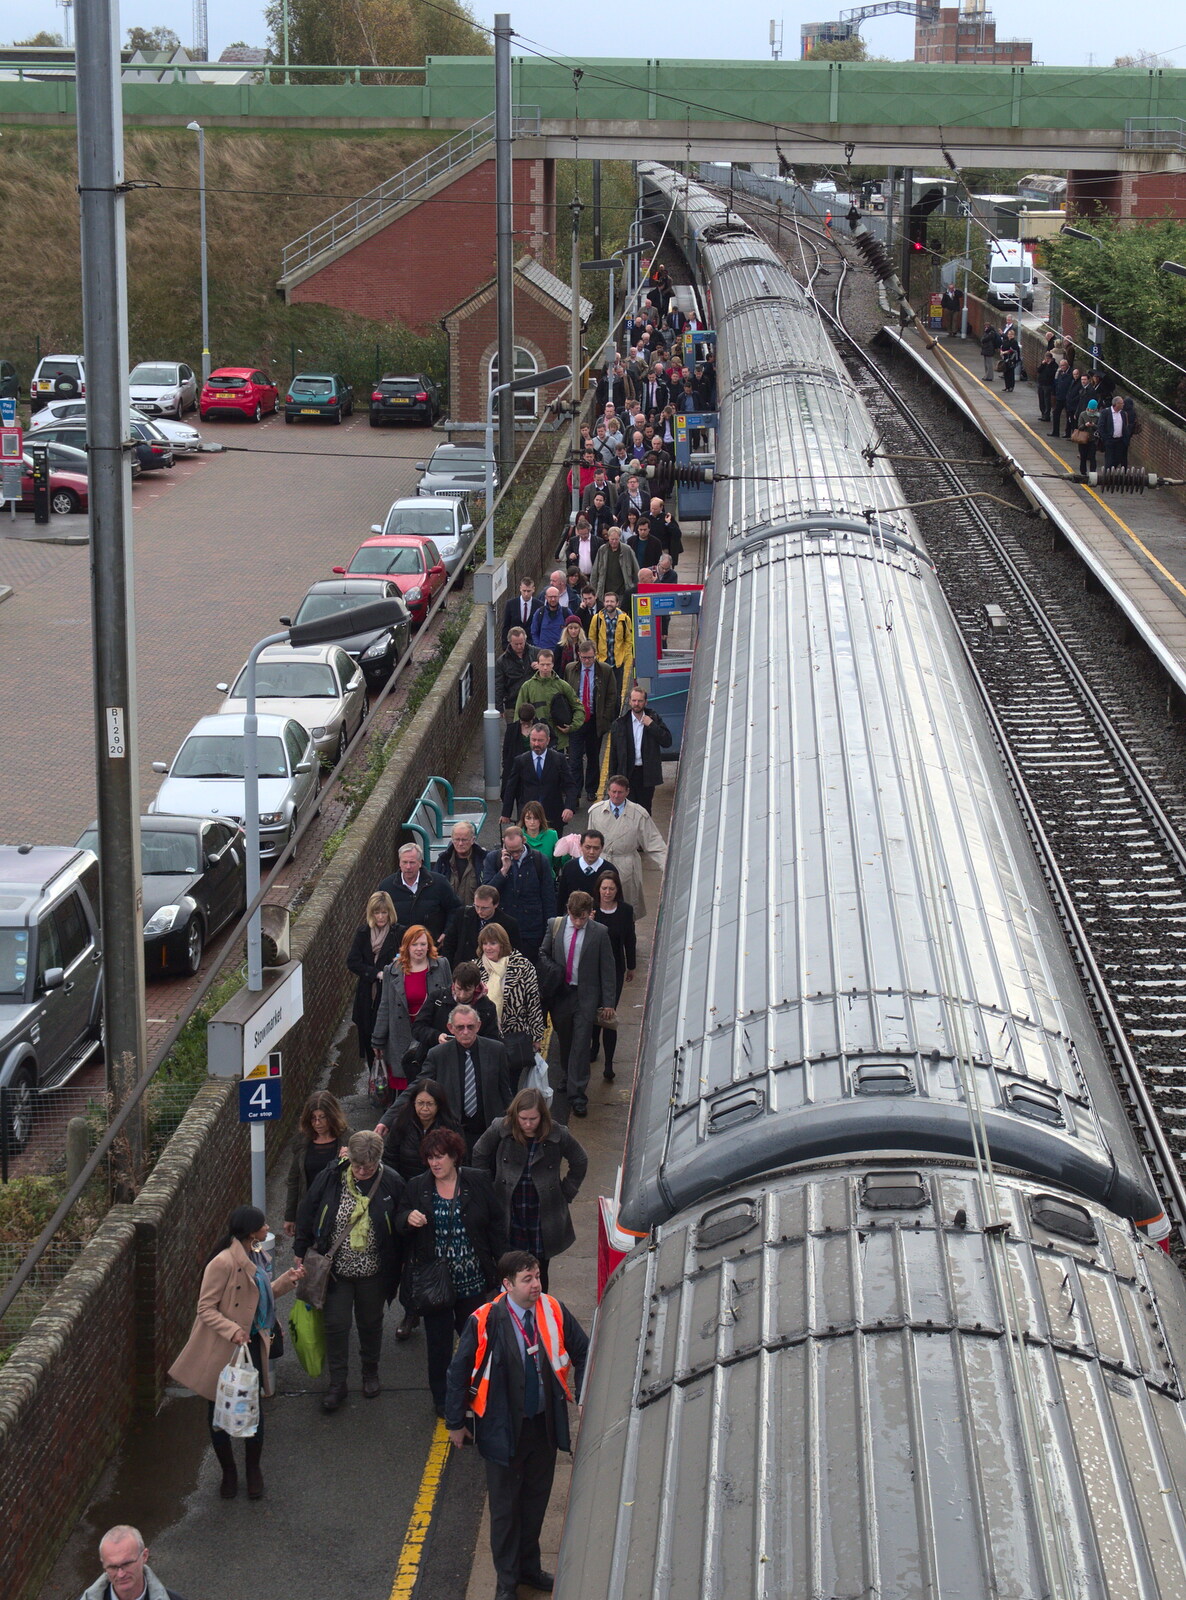 Another 500 people pile off the train from (Very) Long Train (Not) Running, Stowmarket, Suffolk - 21st October 2014